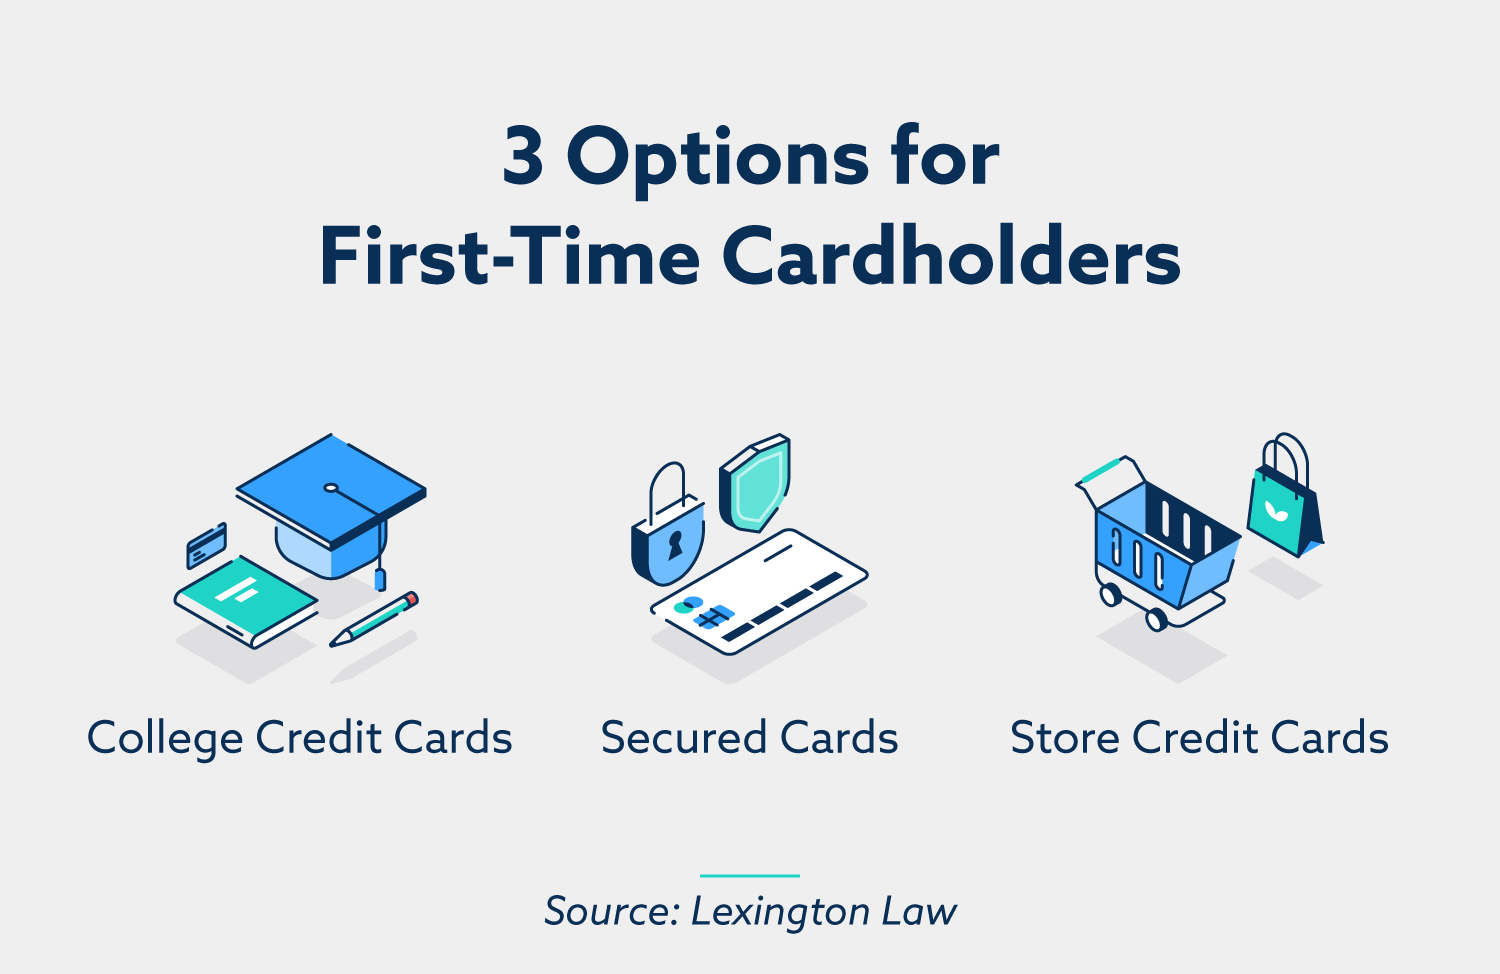 3 options for first-time cardholders: college credit cards, secured cards, store credit cards.